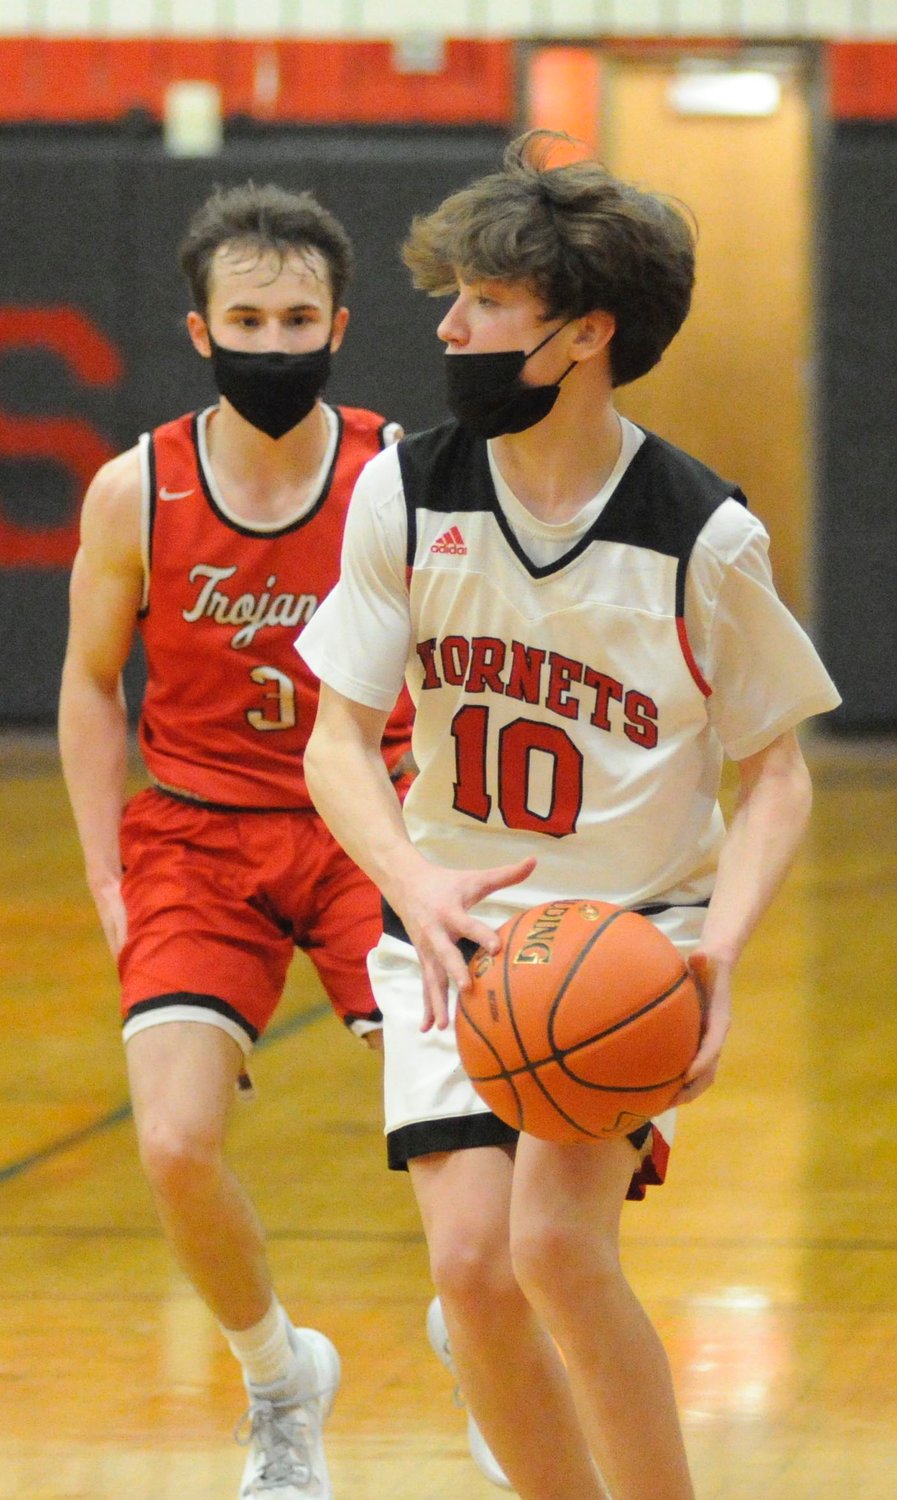 Searching for a score. Honesdale’s junior guard Karter Kromko scored 9 points, all 3-pointers. He is challenged on the court by North Pocano’s Zack Walsh, who posted 12 points, including two 3-pointers.